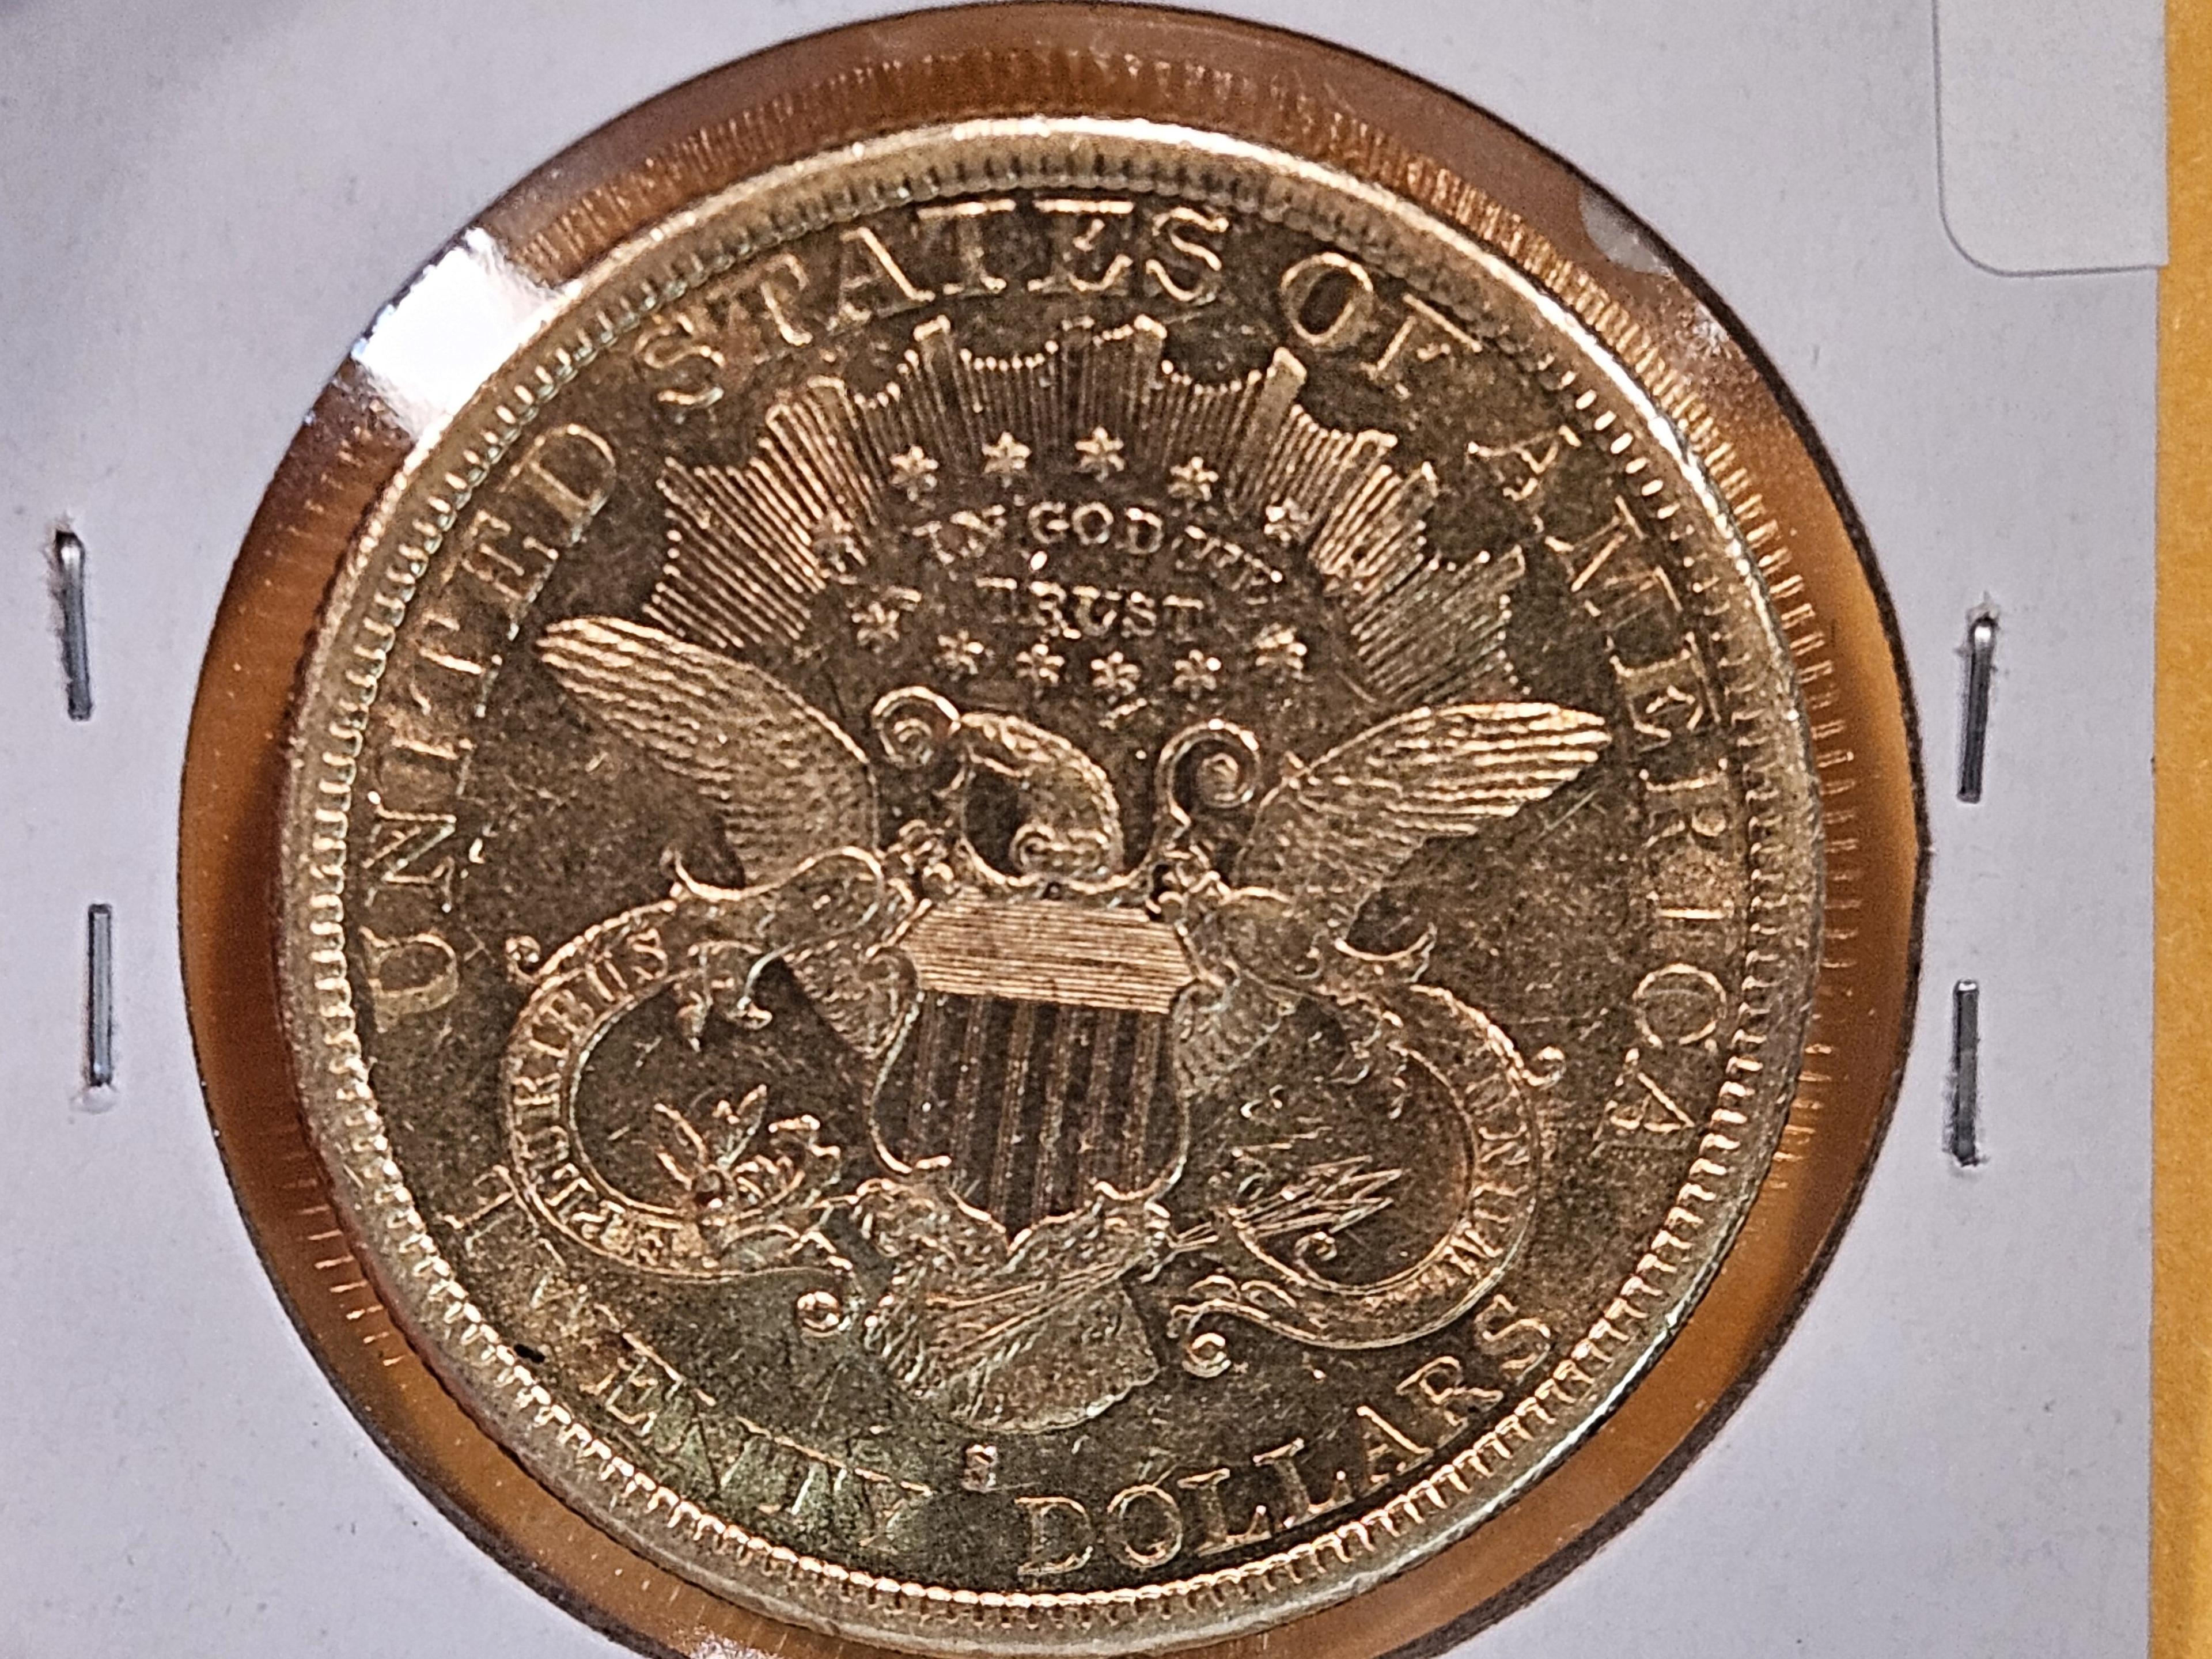 GOLD! Brilliant Uncirculated 1884-S Liberty Head $20 Gold Double Eagle